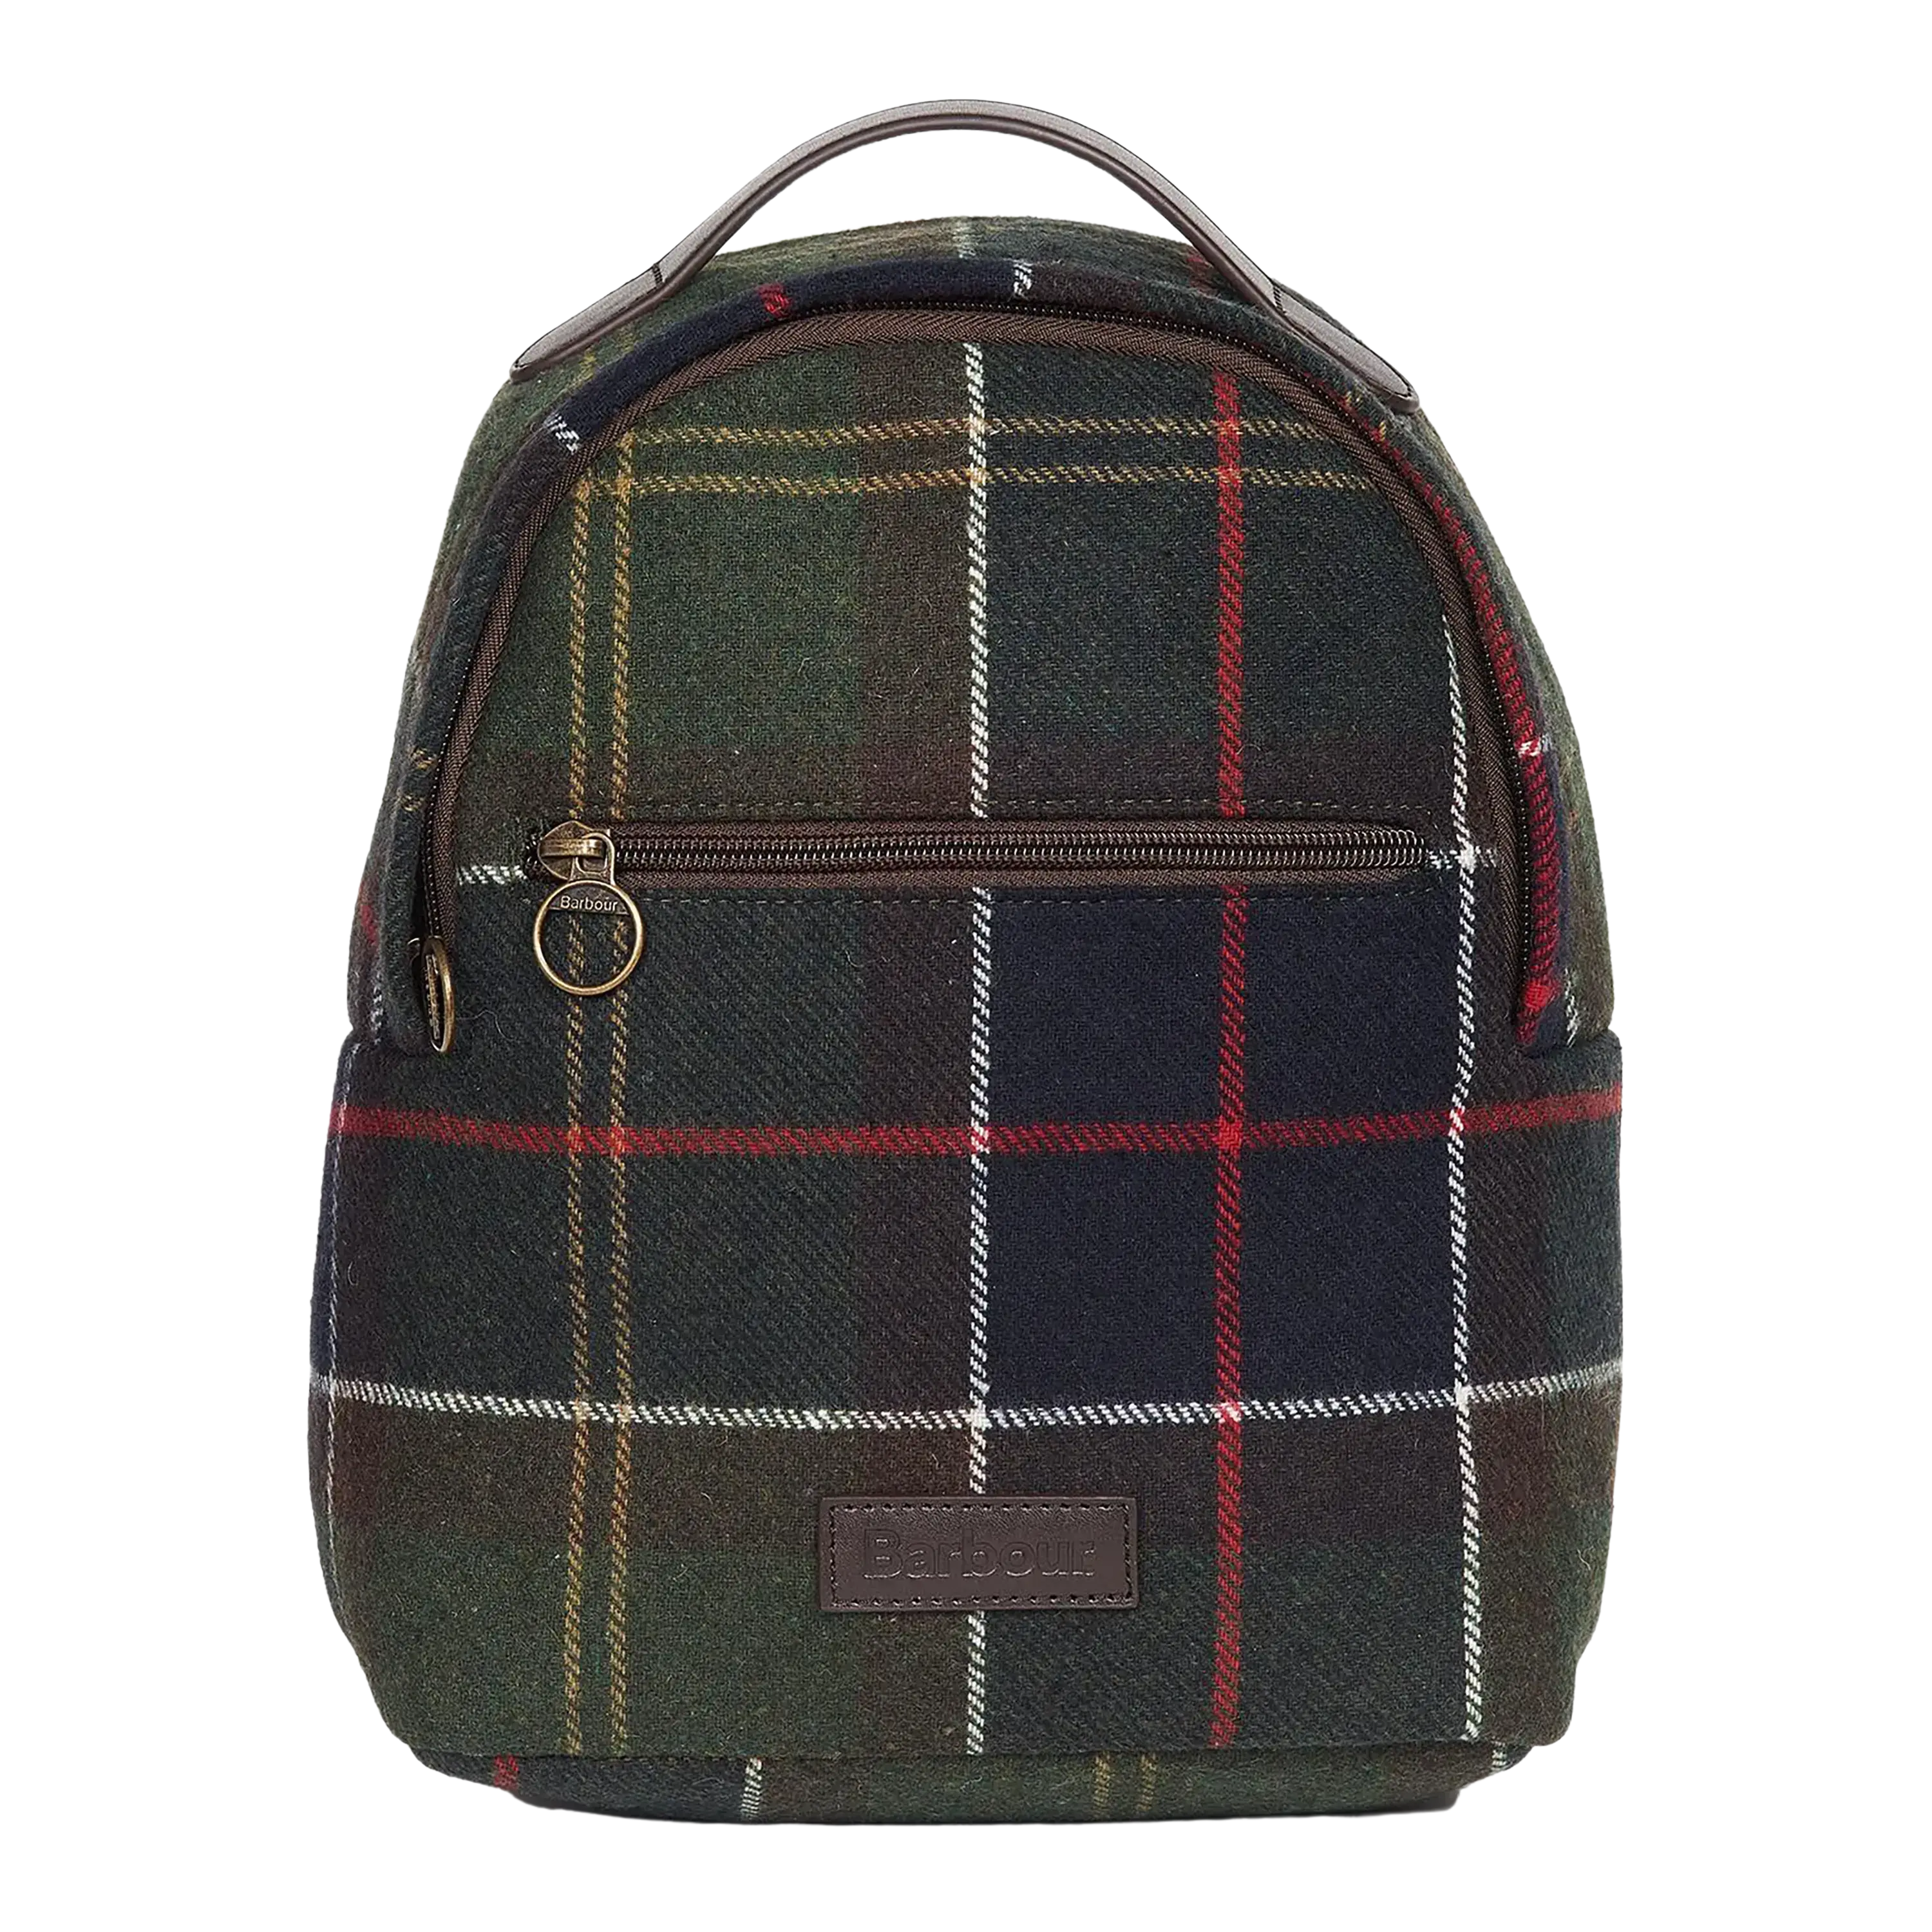 Barbour Caley Classic Tartan Backpack